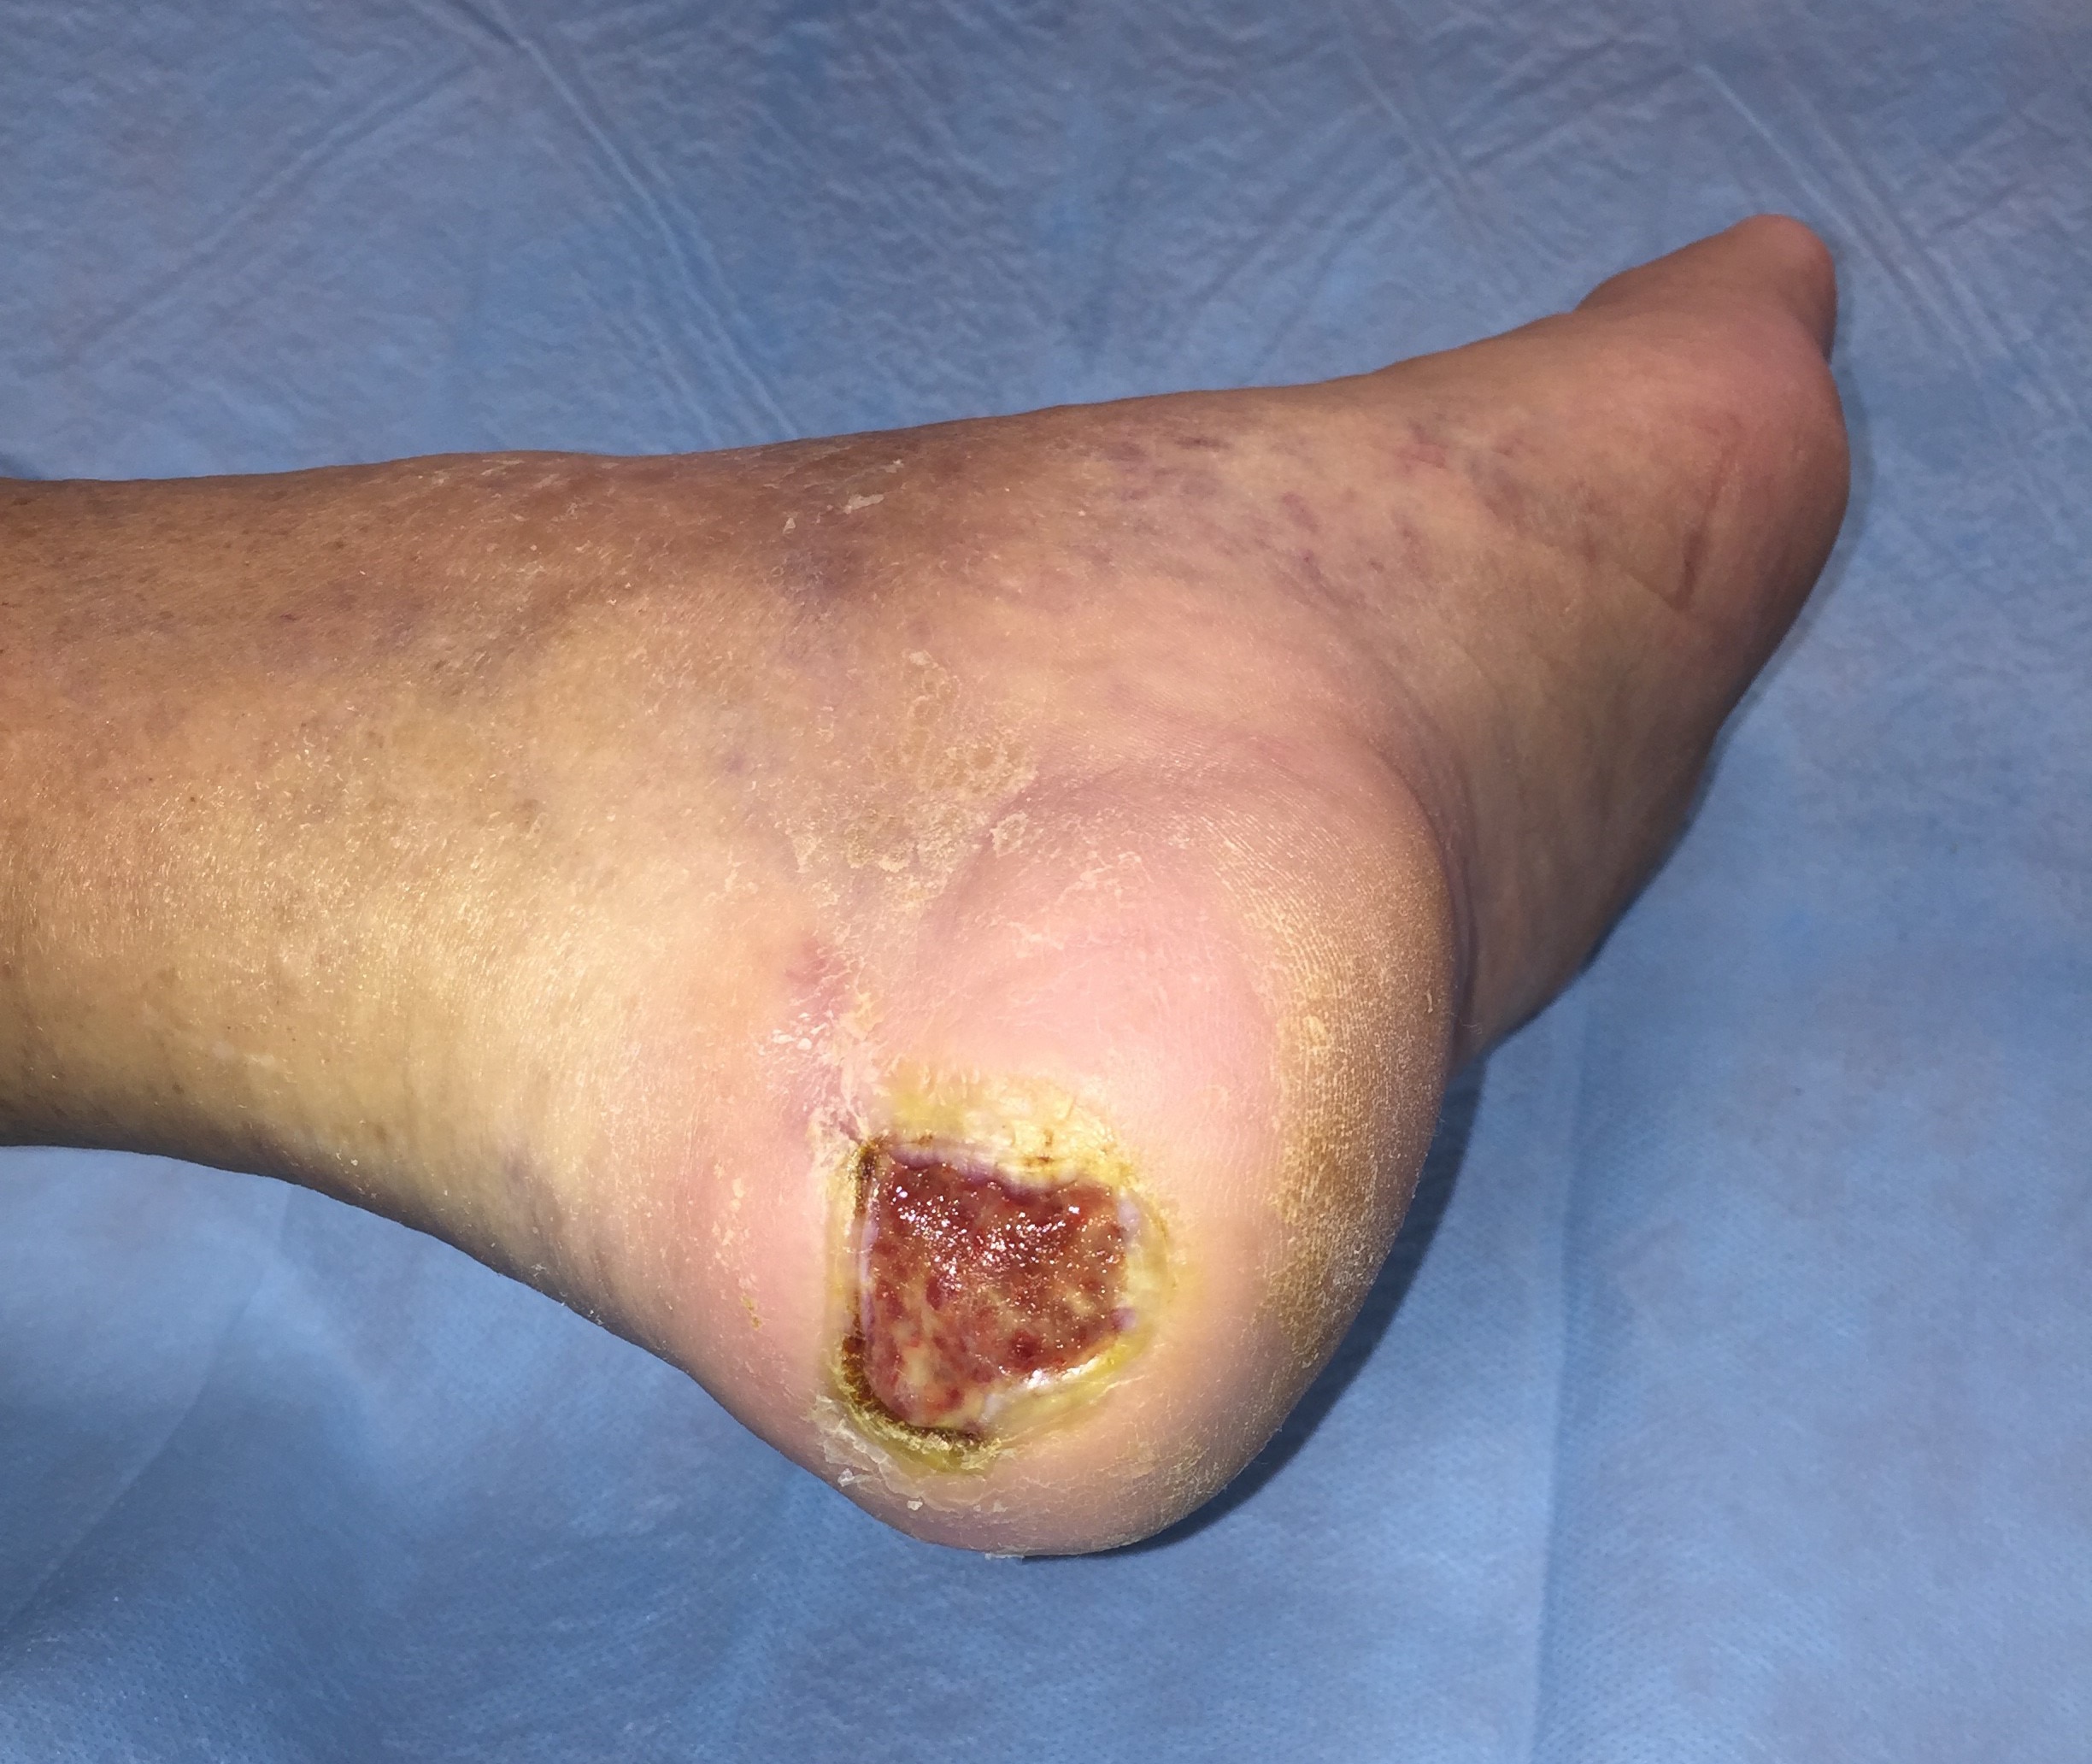 Treatment of a mildly infected diabetic foot ulcer on the heel